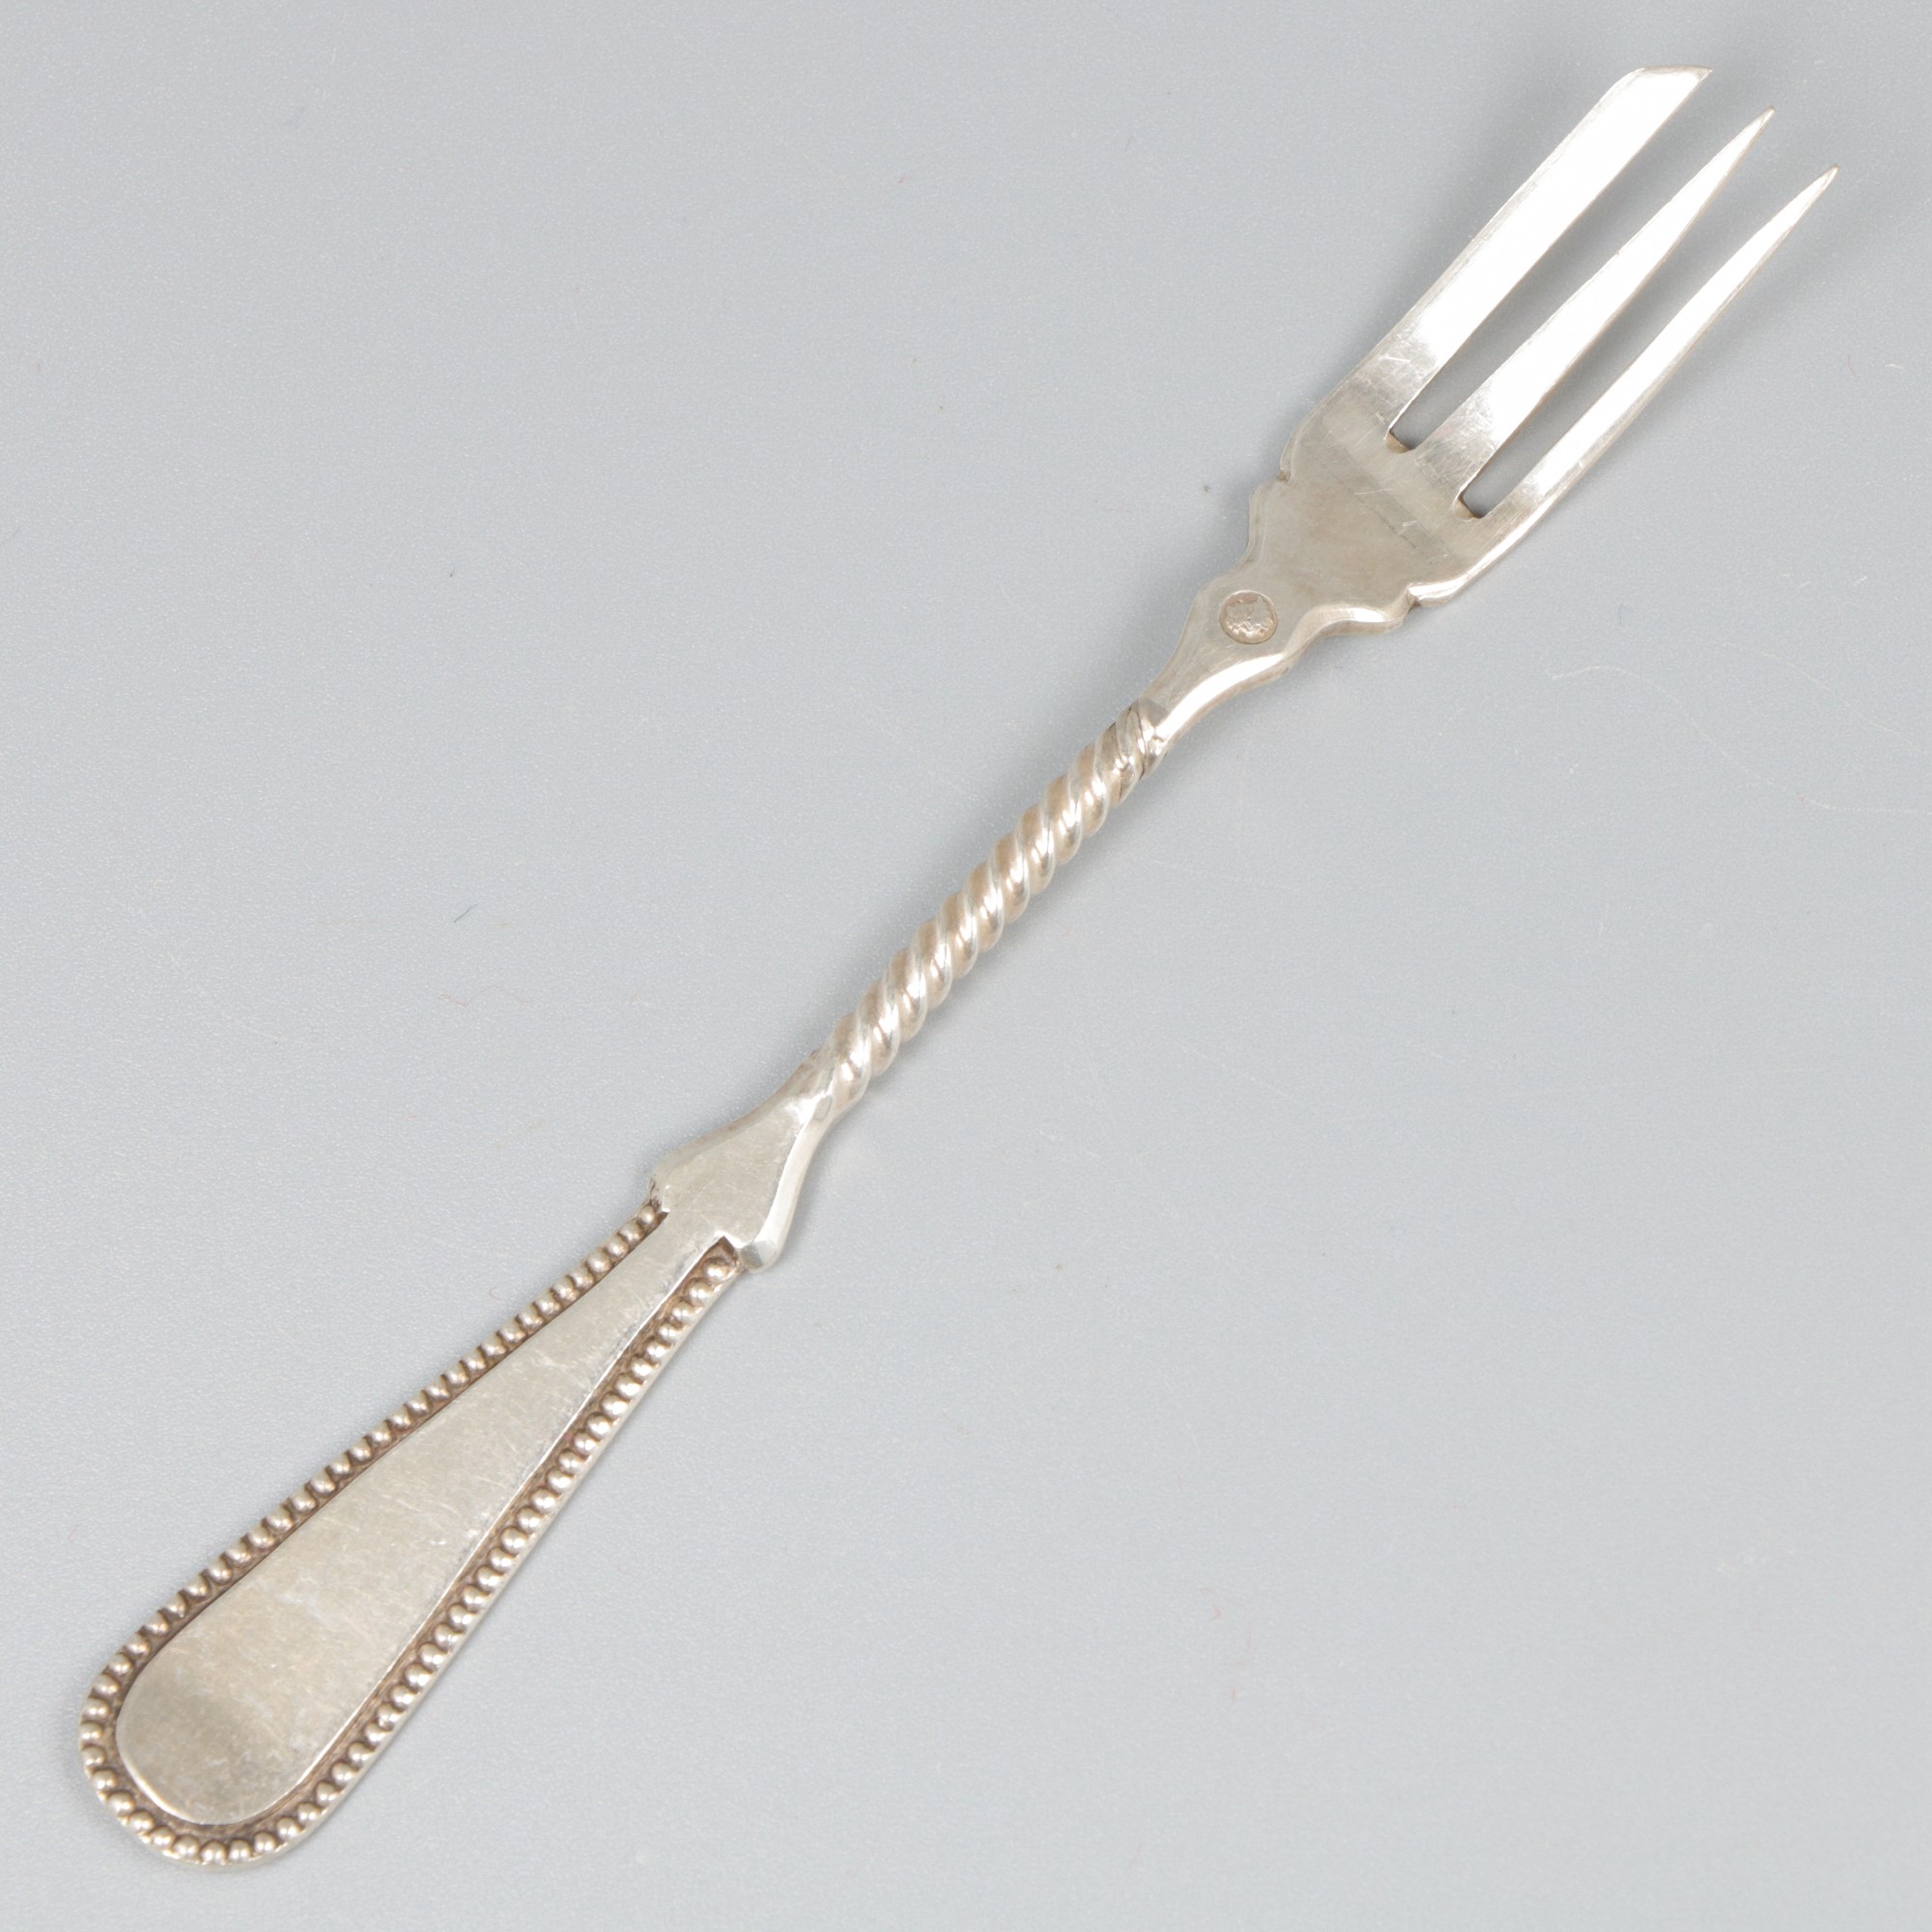 12-piece set of cake / pastry forks silver. - Image 3 of 7